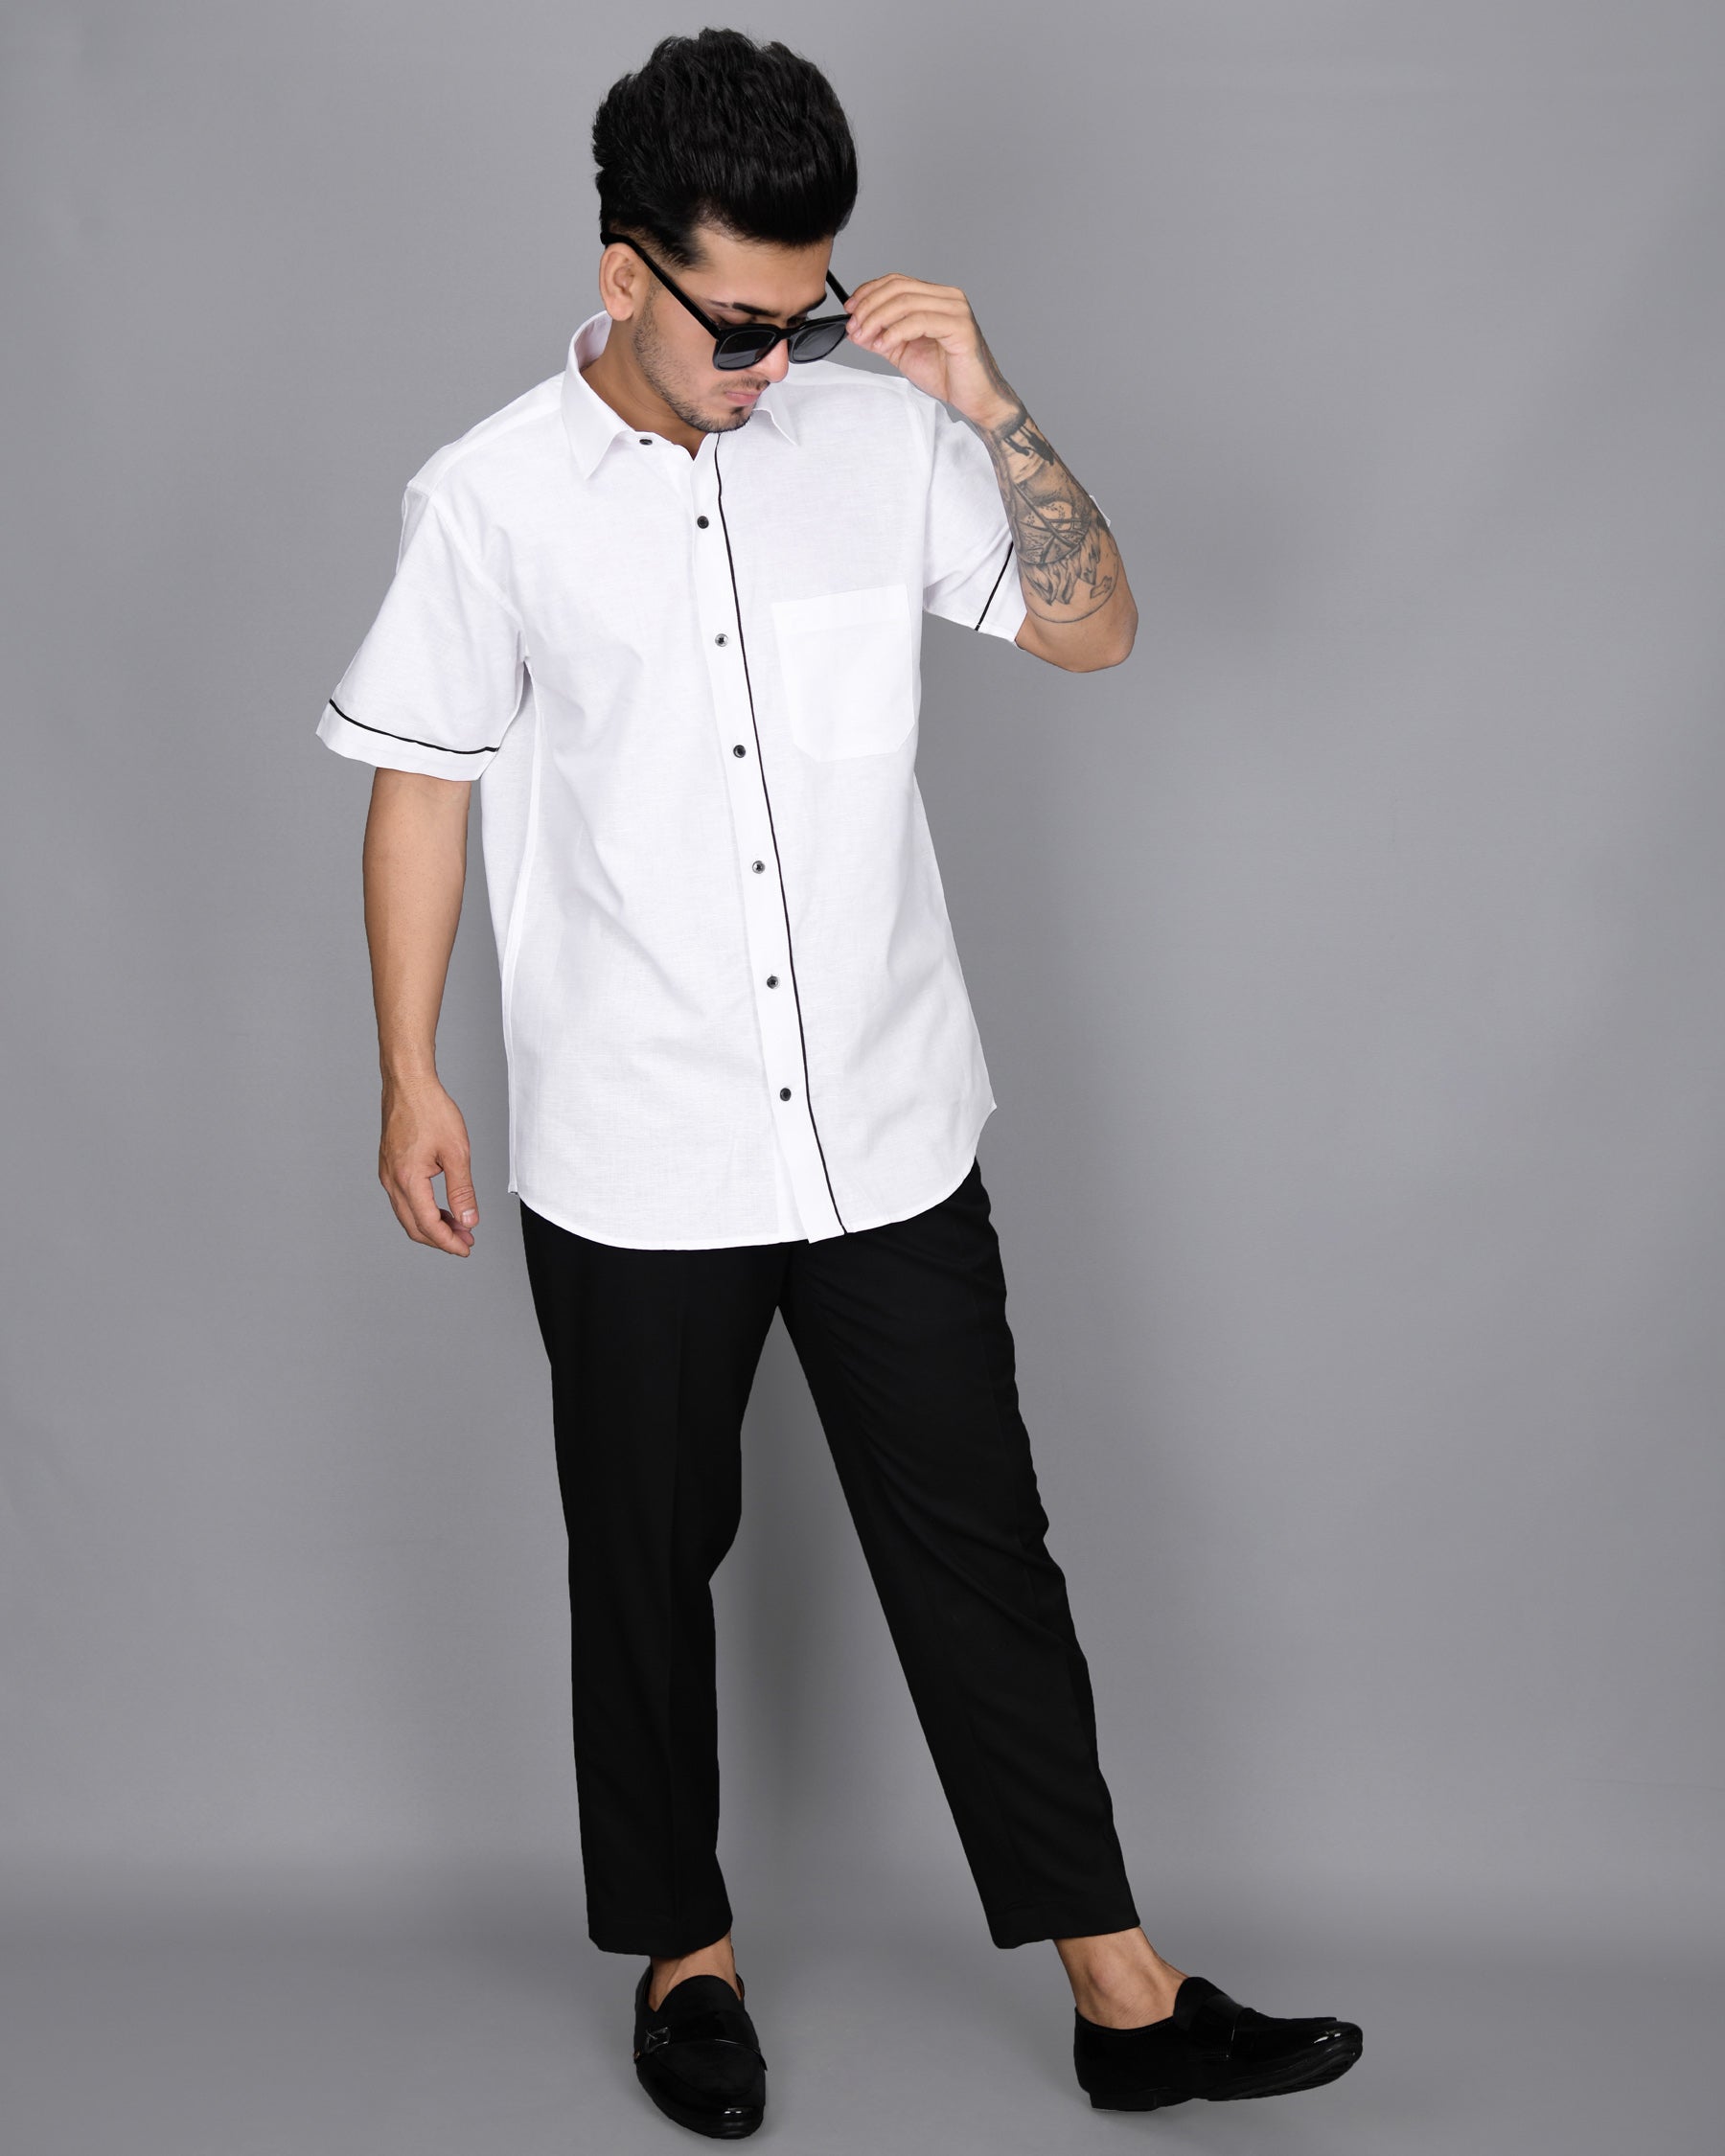 Bright White with Black Piping Luxurious Linen Shirt 3190BLK-P19-38, 3190BLK-P19-H-38, 3190BLK-P19-39, 3190BLK-P19-H-39, 3190BLK-P19-40, 3190BLK-P19-H-40, 3190BLK-P19-42, 3190BLK-P19-H-42, 3190BLK-P19-44, 3190BLK-P19-H-44, 3190BLK-P19-46, 3190BLK-P19-H-46, 3190BLK-P19-48, 3190BLK-P19-H-48, 3190BLK-P19-50, 3190BLK-P19-H-50, 3190BLK-P19-52, 3190BLK-P19-H-52